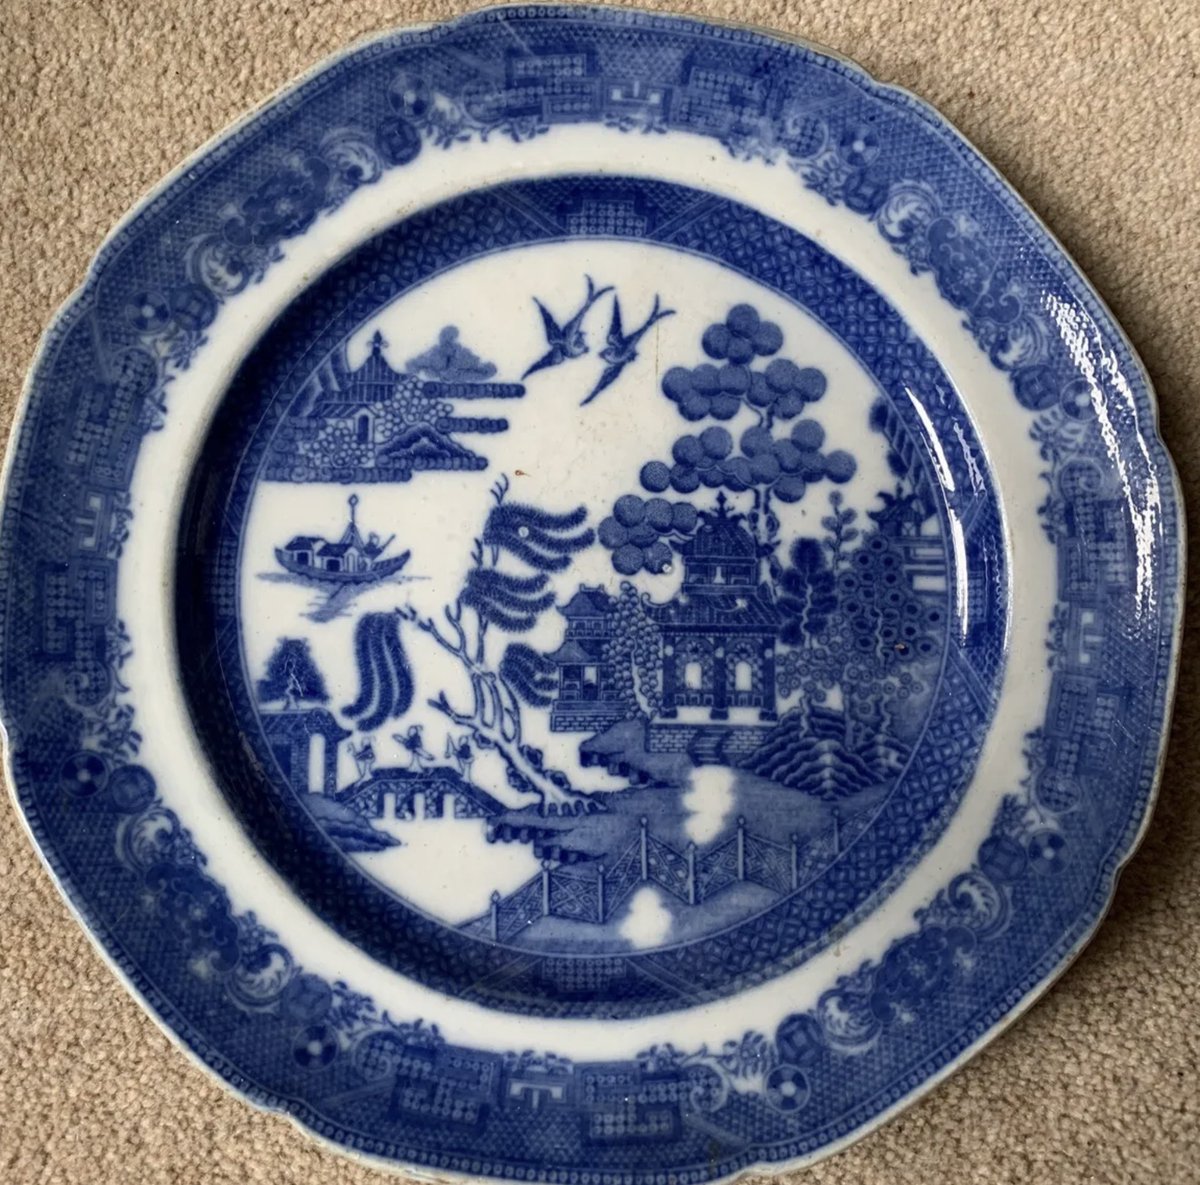 An early pair of #Spode transfer printed #pearlware plates (c.1800), decorated with #WillowPattern. A lovely deep #cobalt blue. On the base are a couple of Workmens parallel lines.